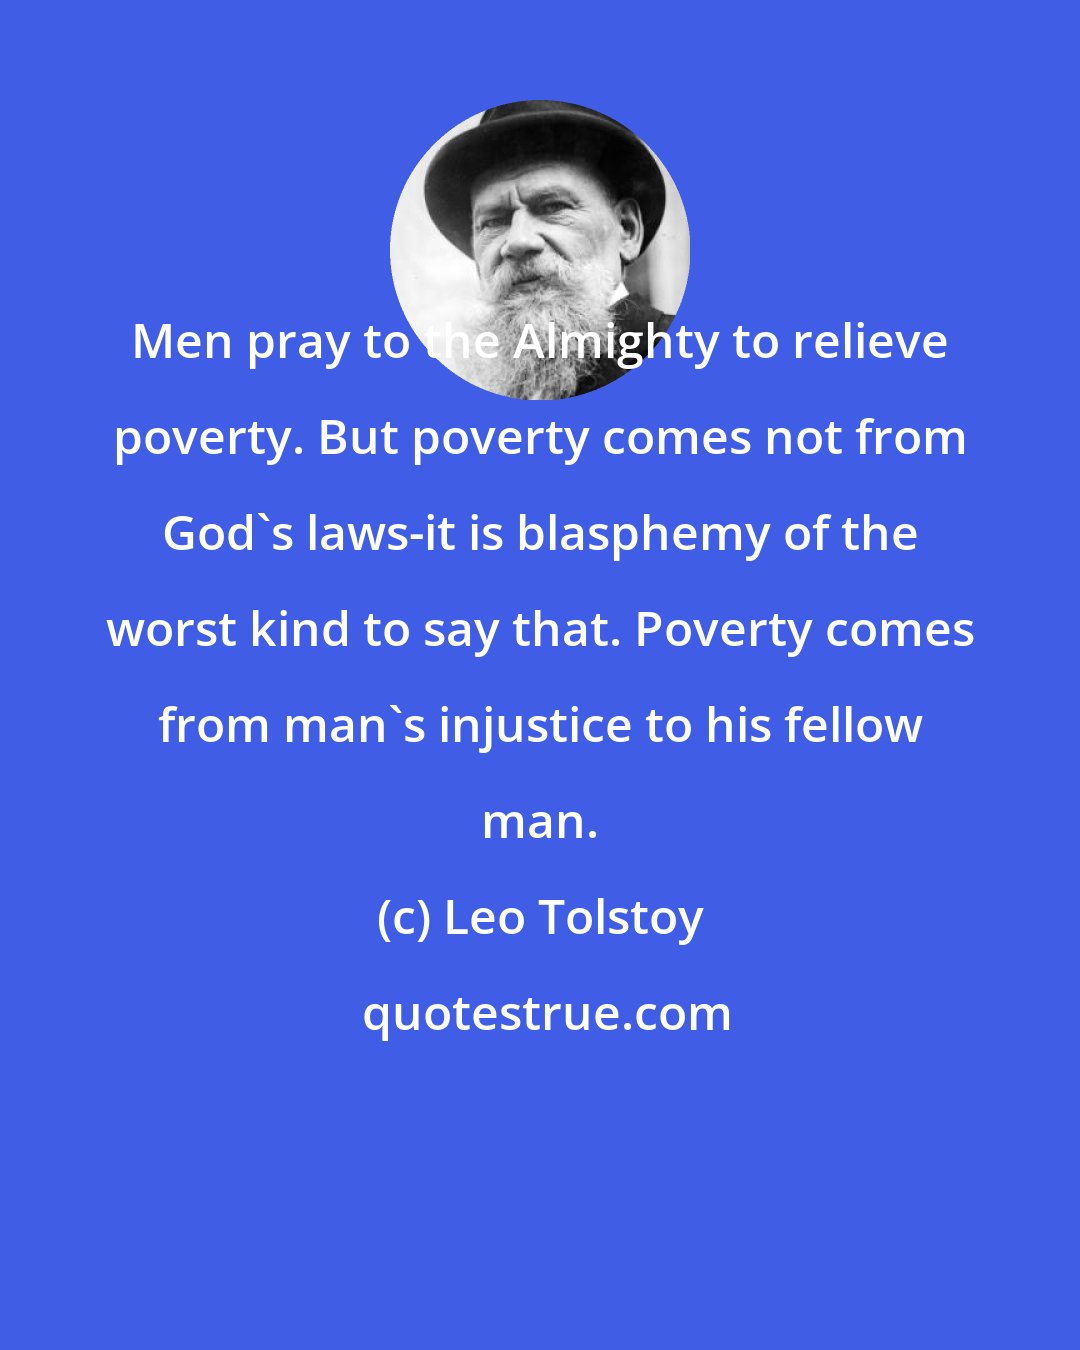 Leo Tolstoy: Men pray to the Almighty to relieve poverty. But poverty comes not from God's laws-it is blasphemy of the worst kind to say that. Poverty comes from man's injustice to his fellow man.